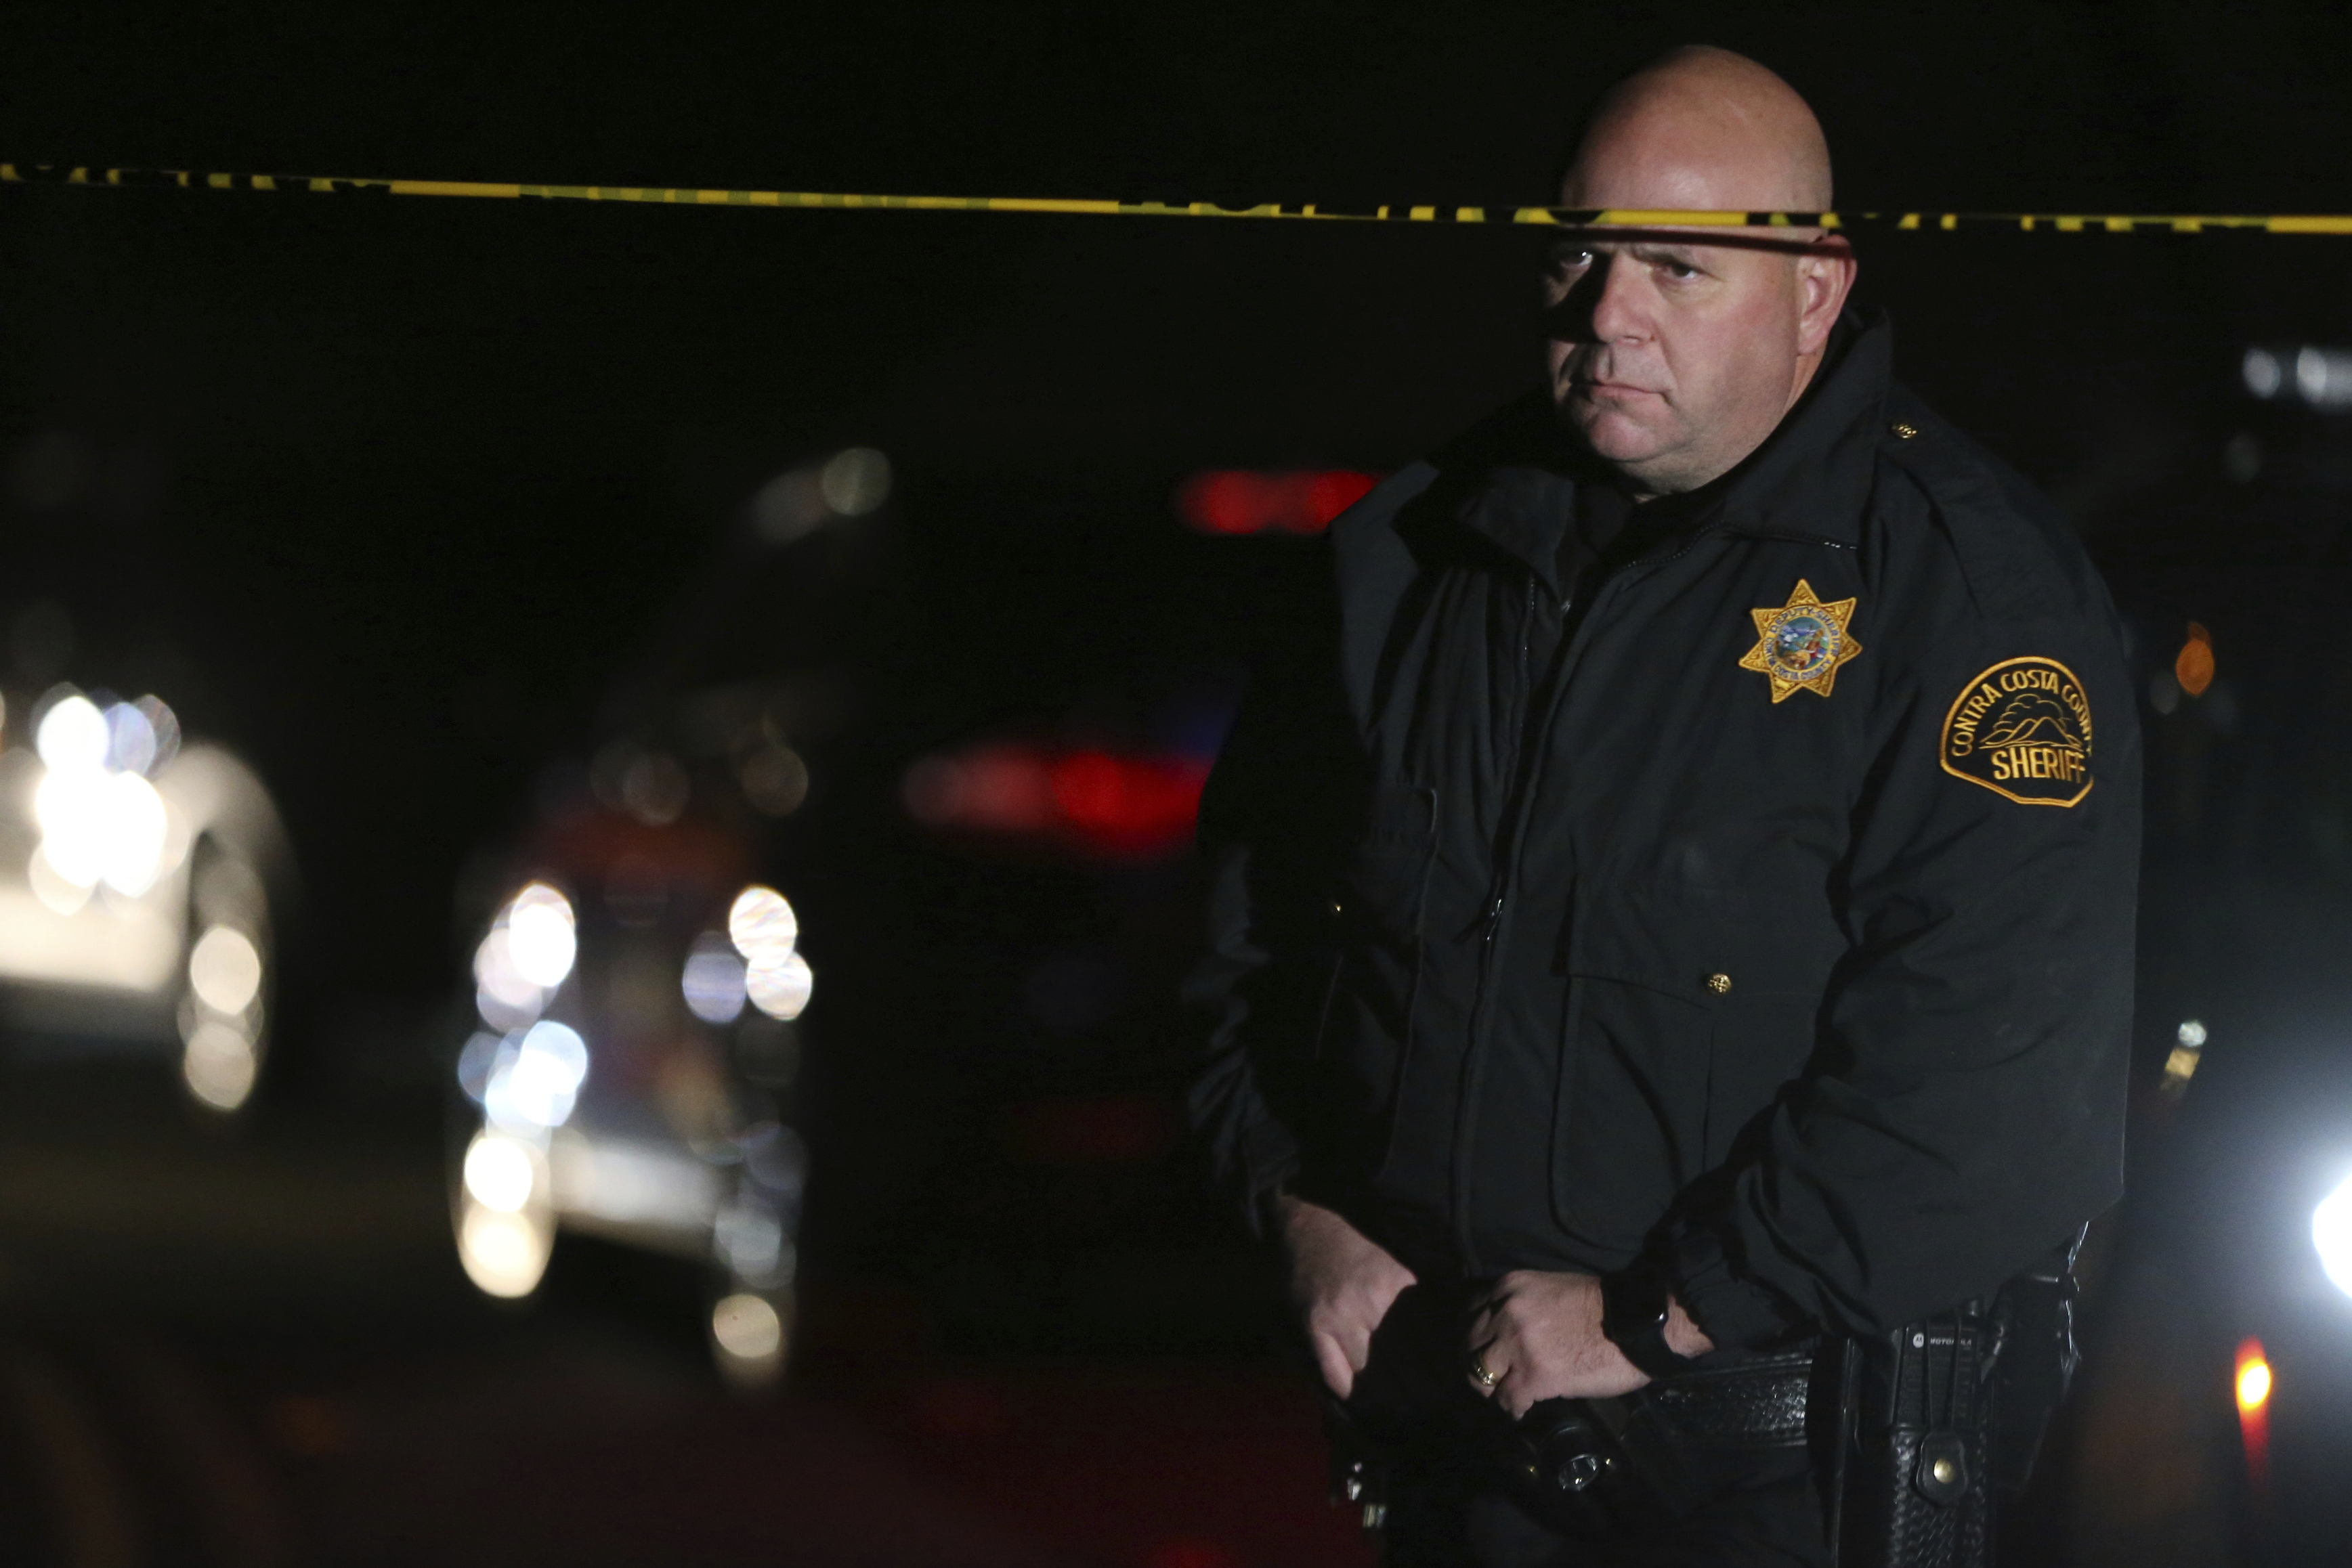 Contra Costa County Sheriff deputies investigate a multiple shooting in Orinda, Calif., on Thursday, Oct. 31, 2019. Four people were killed and four others wounded in a Halloween night party shooting at a large rental home in a wealthy San Francisco Bay Area community, police said Friday.  The shooting in the city of about 20,000 just east of Berkeley, happened at a party attended by 100 people said police chief David Cook. (Ray Chavez/East Bay Times via AP)